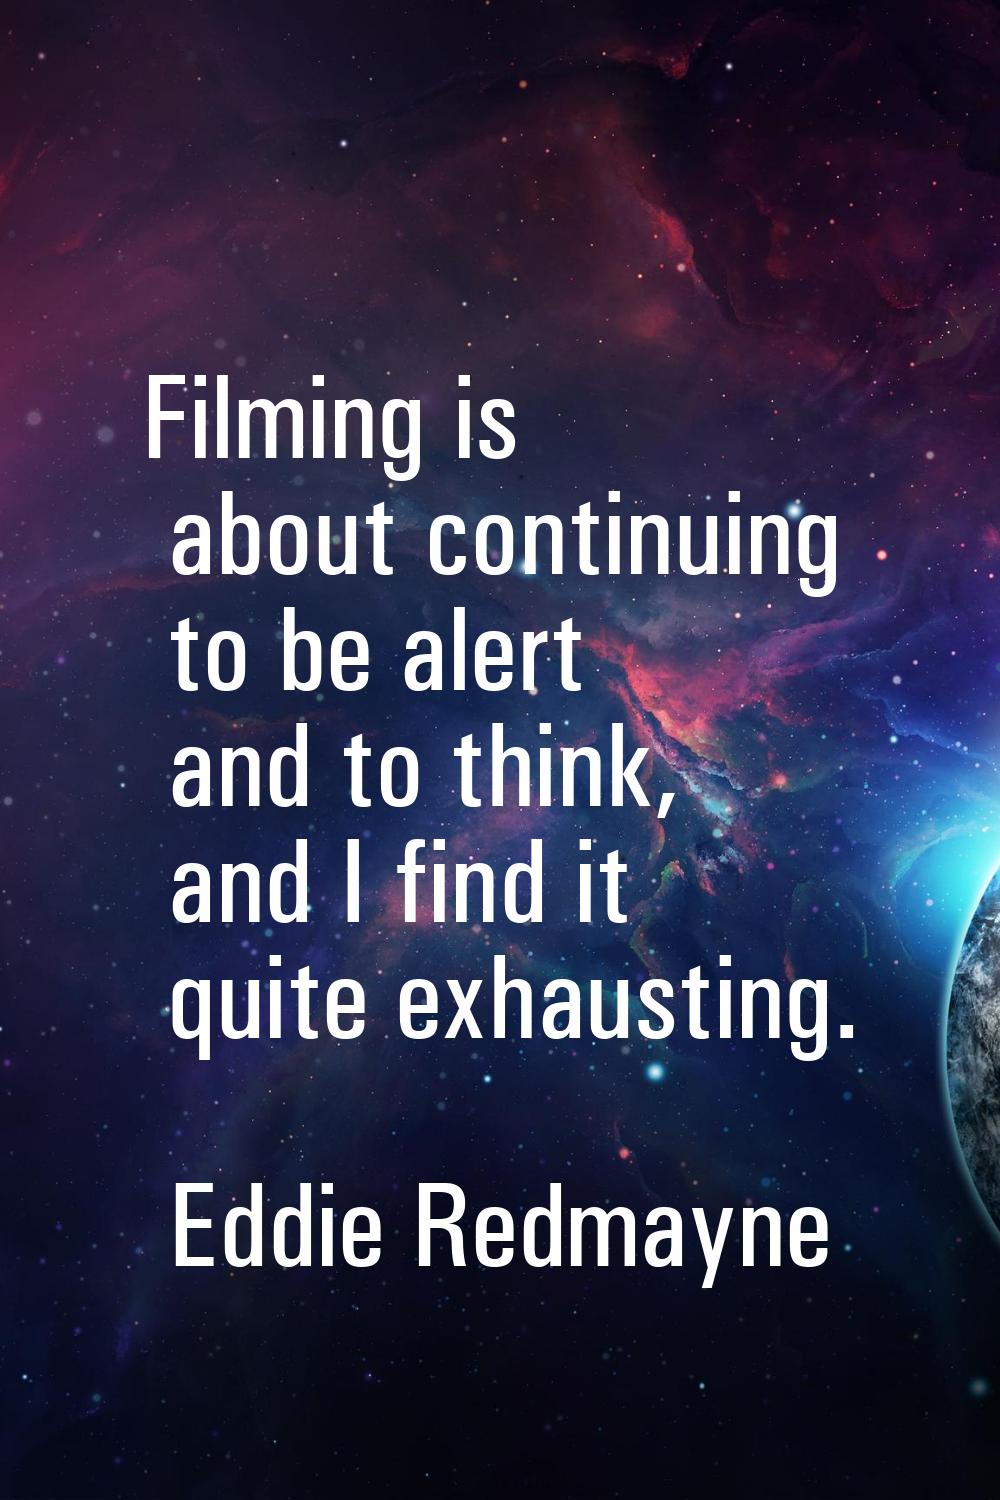 Filming is about continuing to be alert and to think, and I find it quite exhausting.